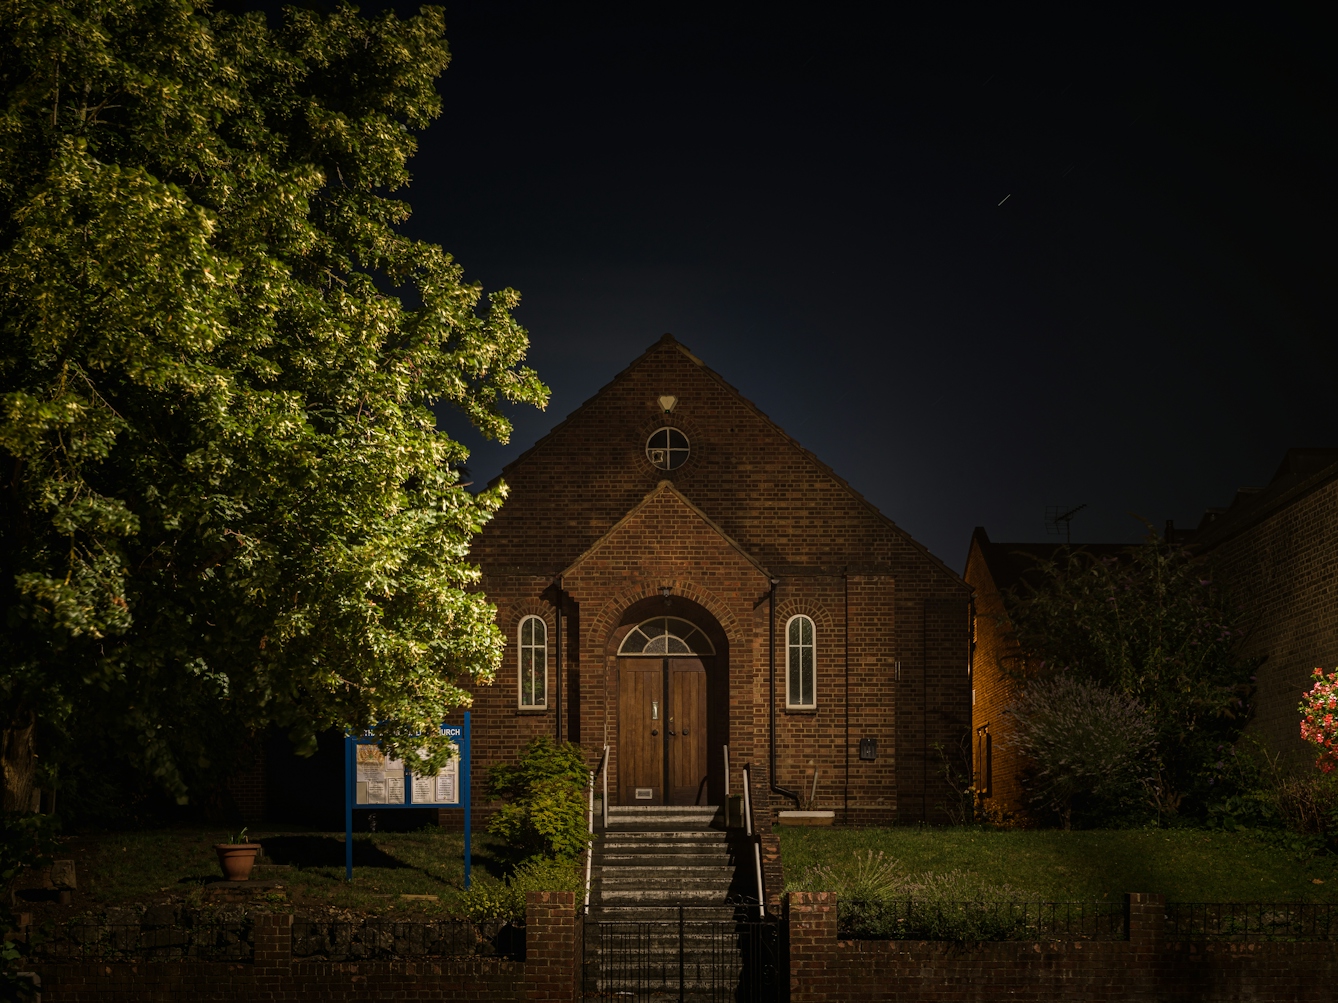 Photograph of Eltham Spiritualist Church at night. The two-storey building is set back from a main road, with a lawn and a brick wall fence.  The facade has three windows, two on the ground floor and one small circular window in the apex of the roof.